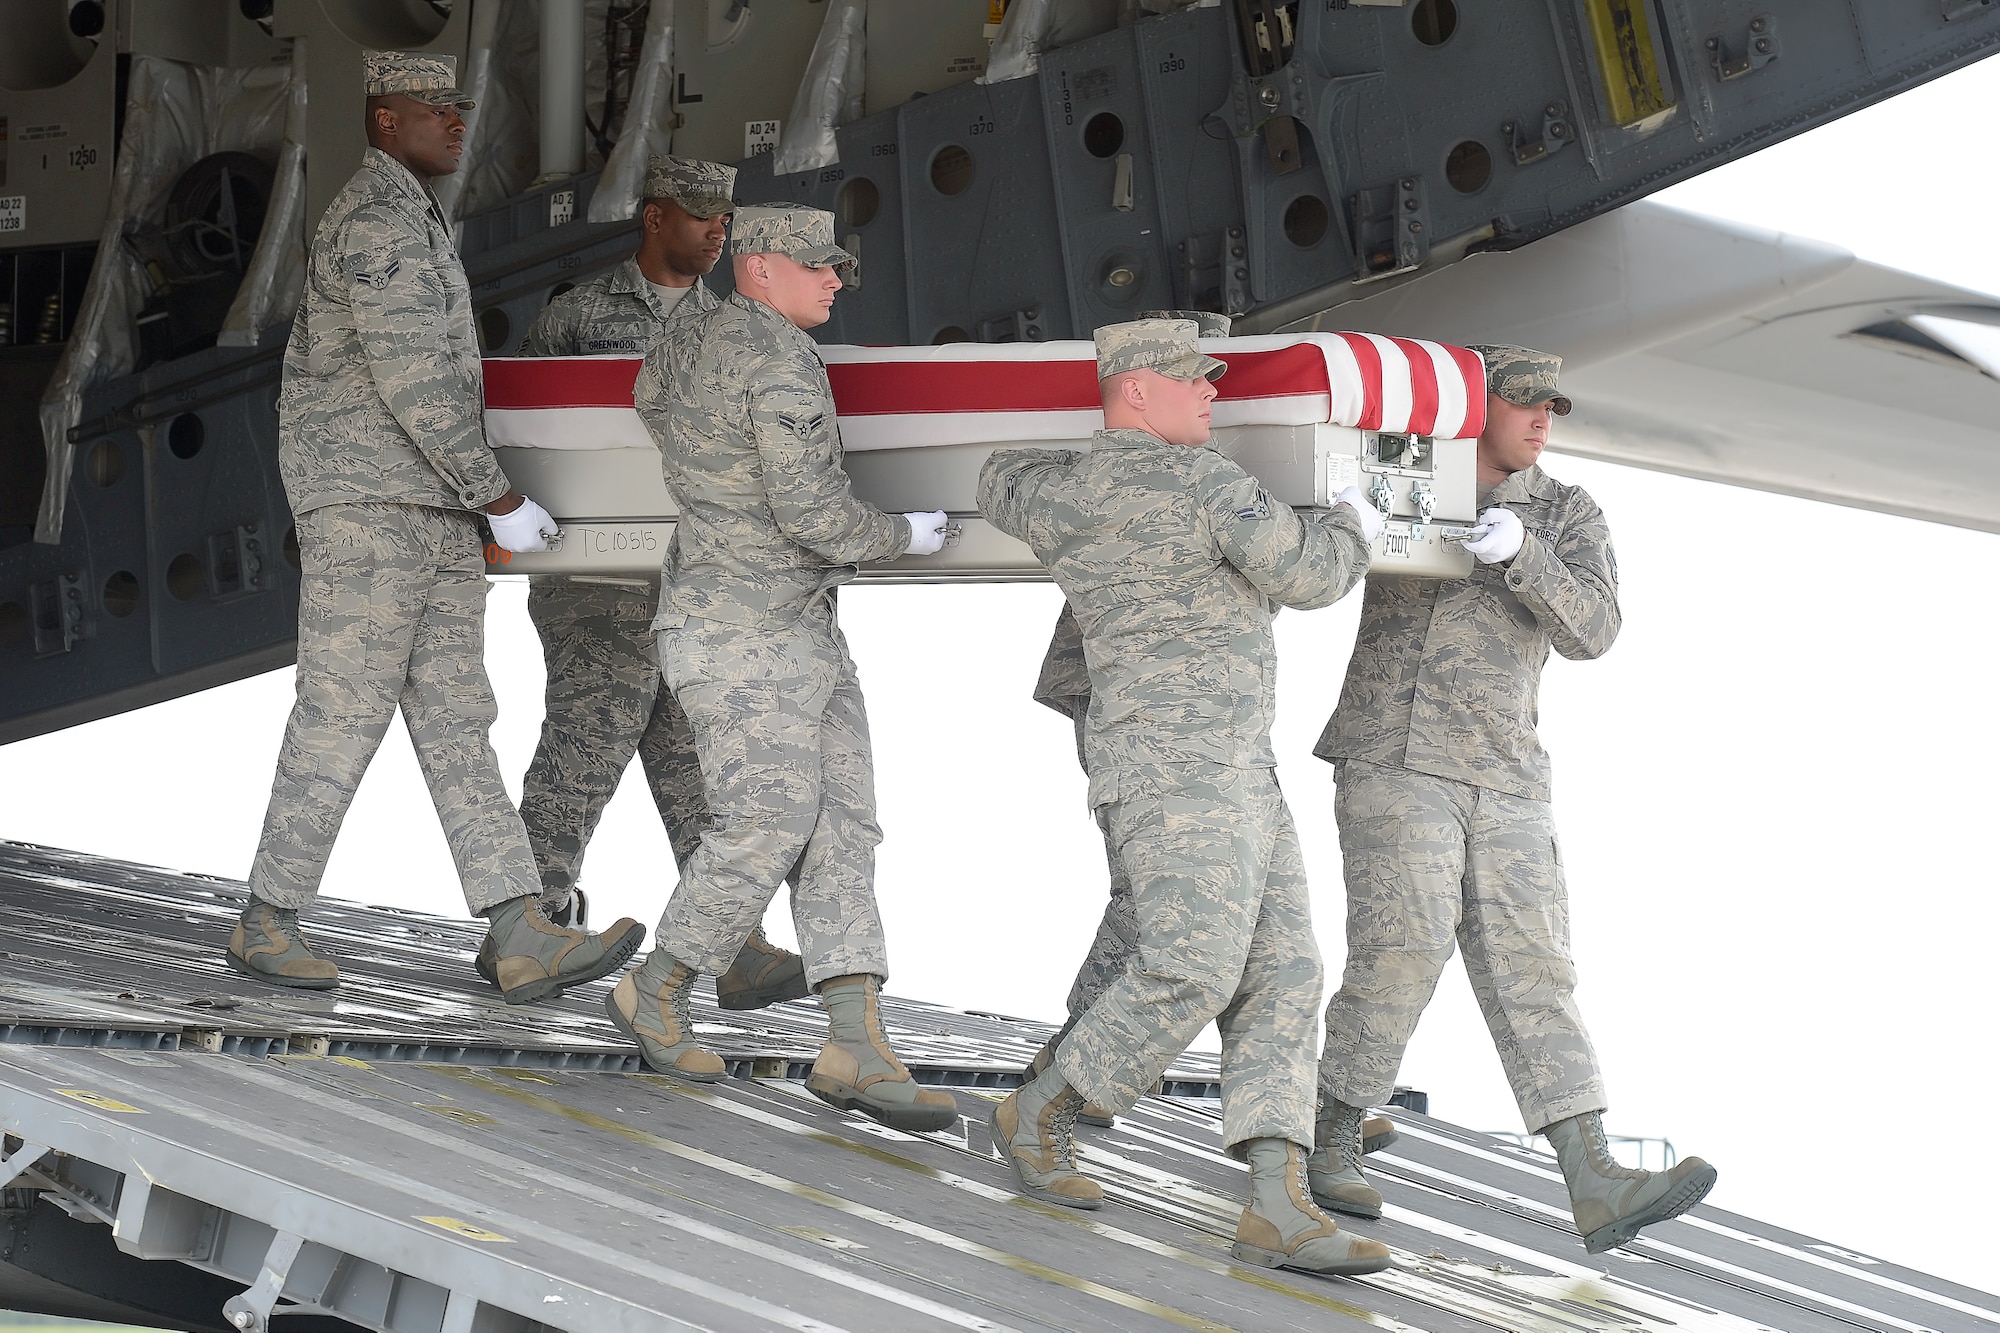 A U.S. Air Force carry team transfers the remains of Capt. Brandon L. Cyr, of Woodbridge, Va., during a dignified transfer April 30, 2013 at Dover Air Force Base, Del. Cyr was assigned to the 906th Air Refueling Squadron, Scott AFB, Ill. (U.S. Air Force photo/Greg L. Davis)